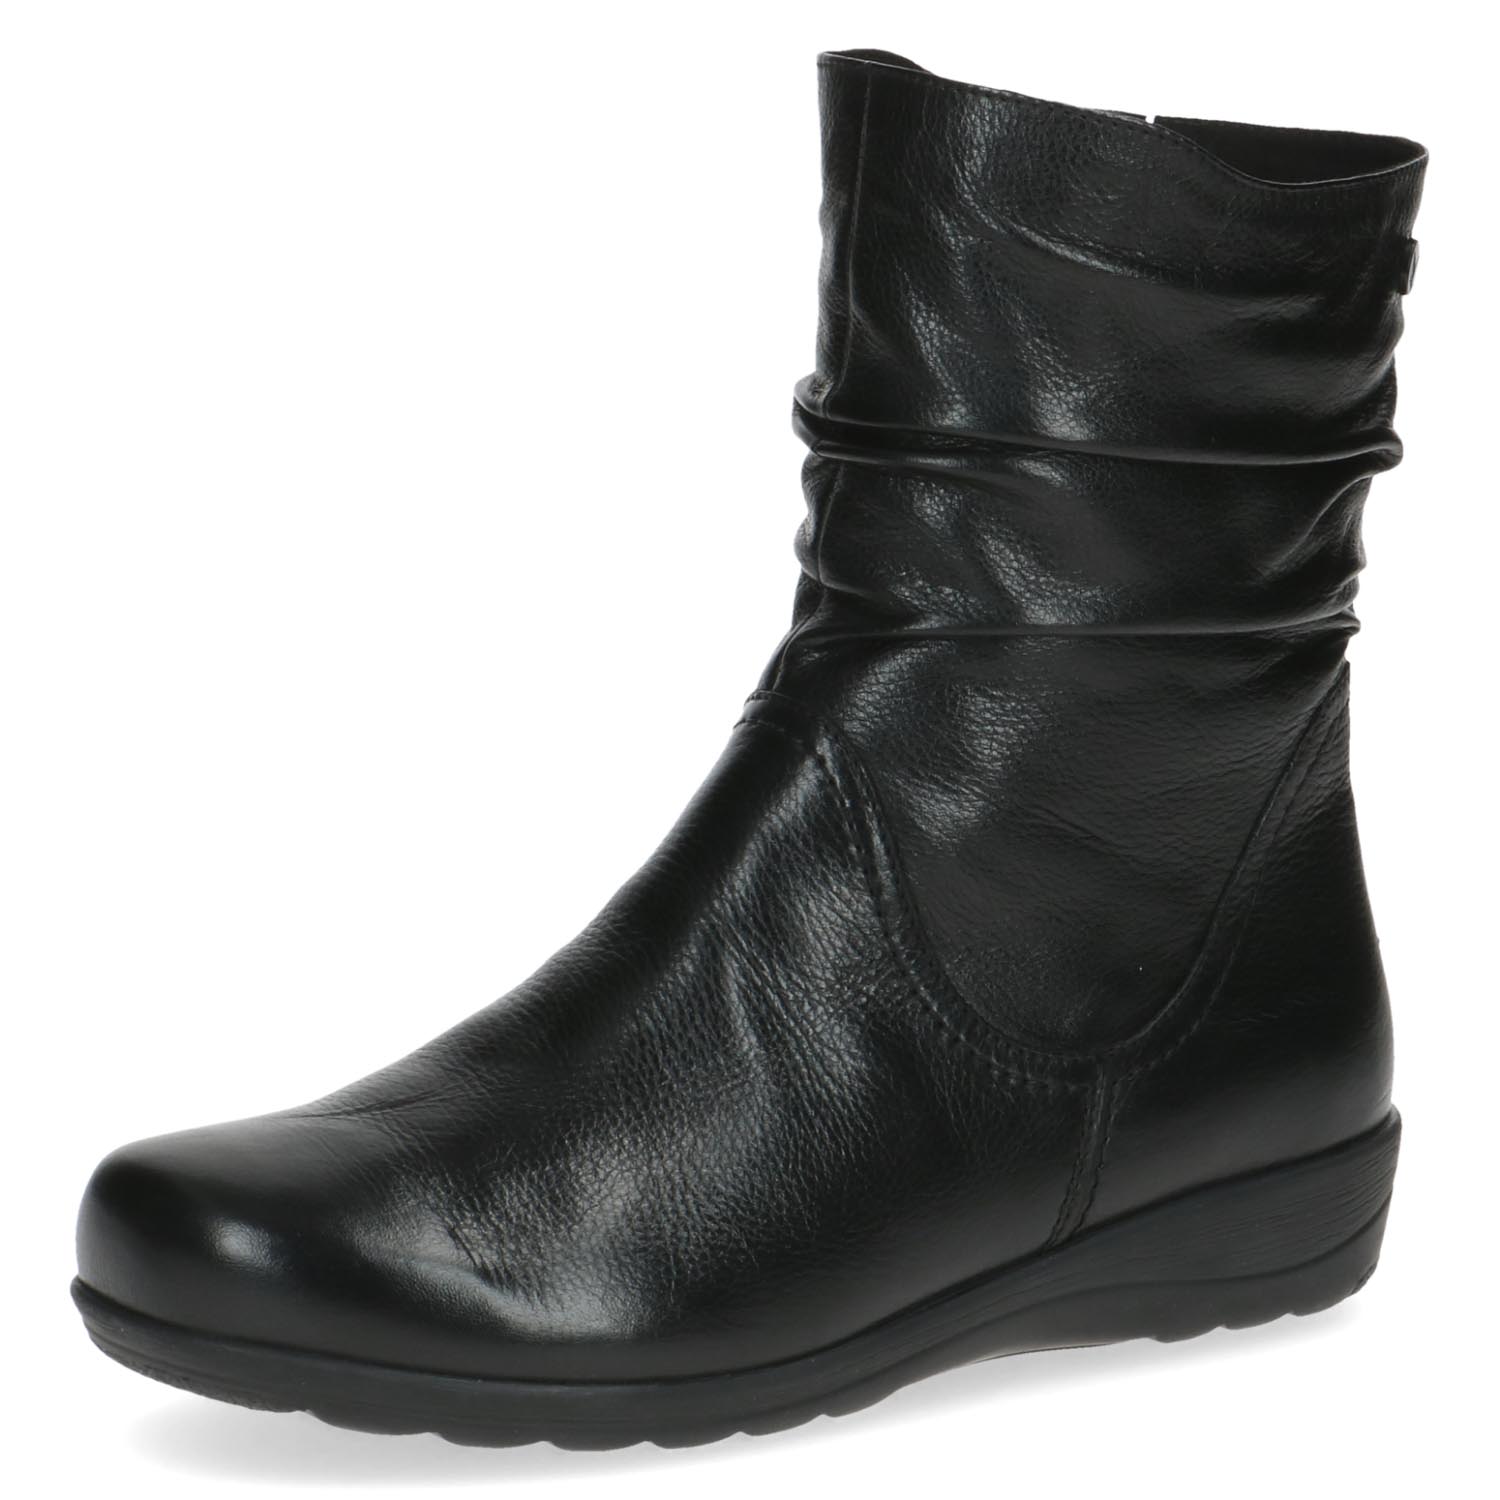 Angled view of the Caprice Casual Ankle Boot displaying its elegant design.